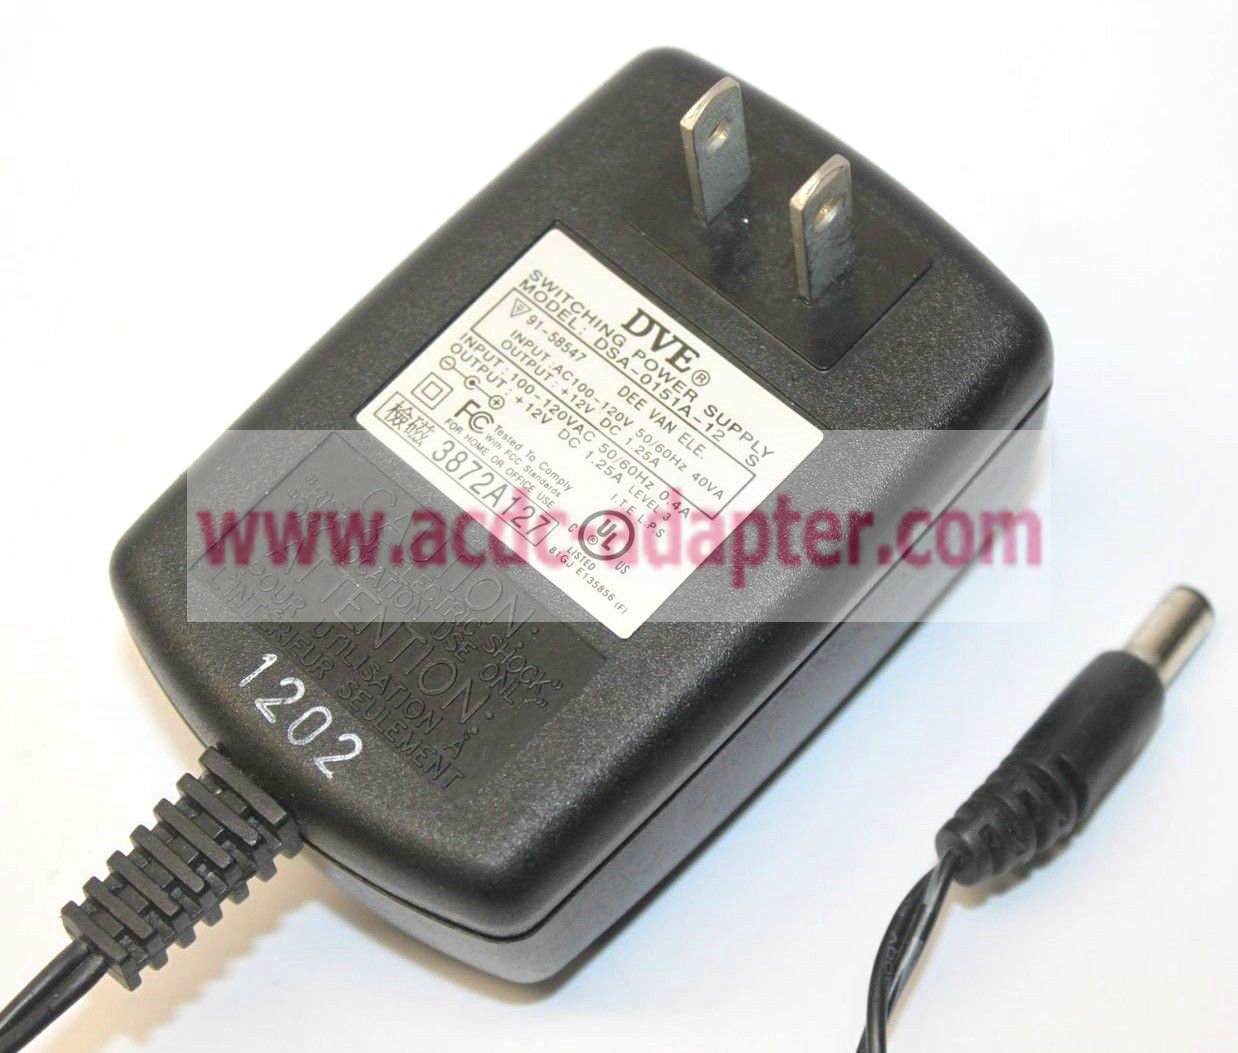 Ventronics AC Adapter Power Supply 12VDC 1200mA 30W Part D48W121200-14//1